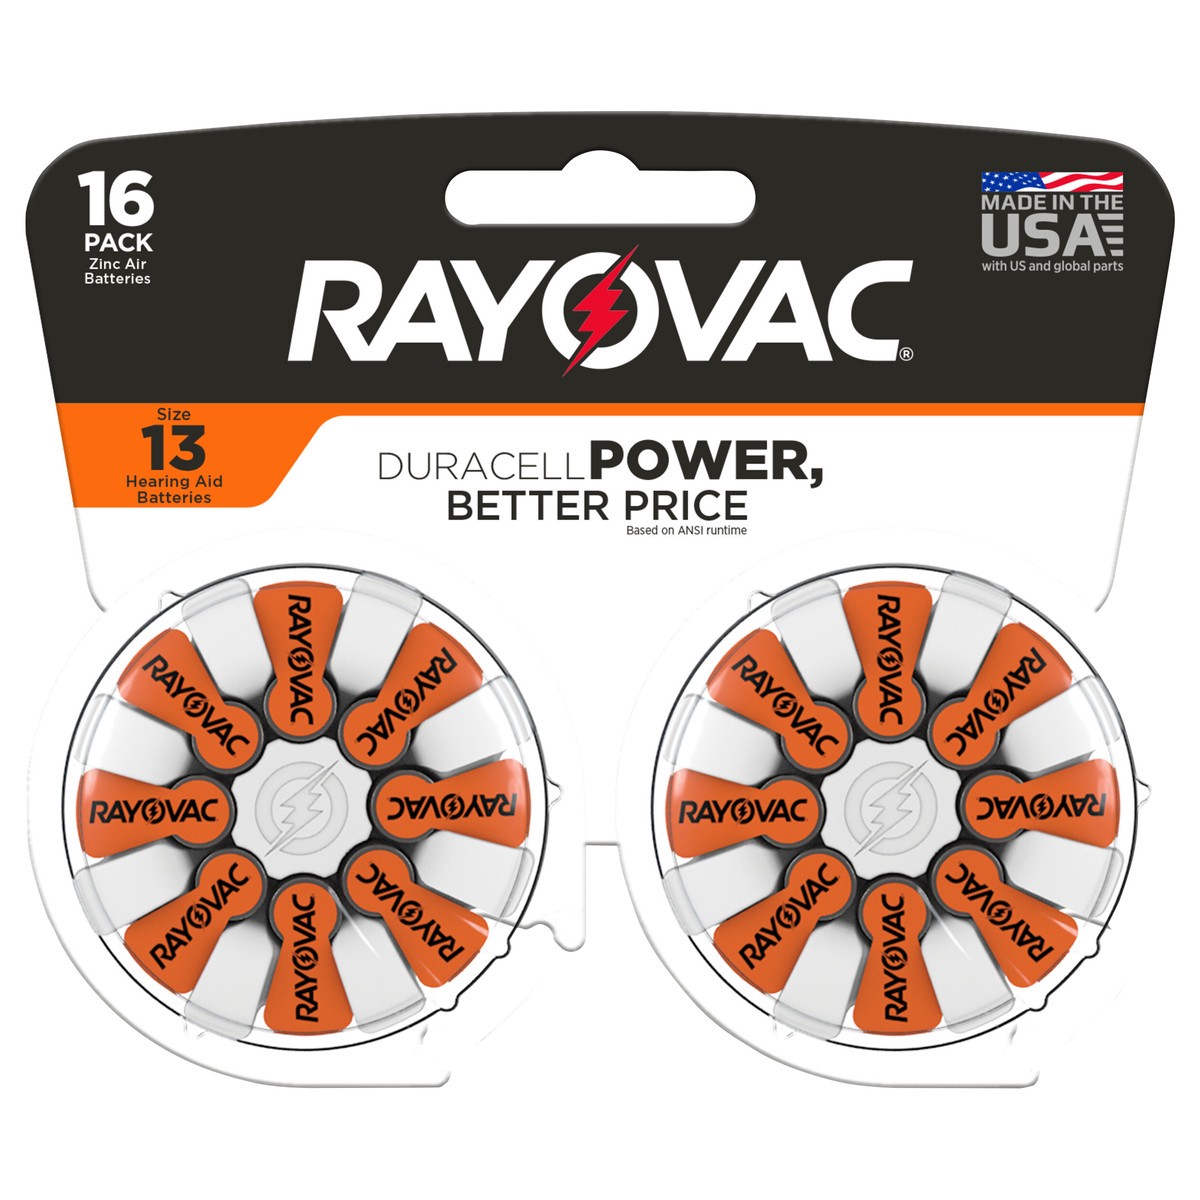 slide 1 of 3, Rayovac Size 13 Hearing Aid Batteries (16 Pack), Size 13 Batteries, 16 ct